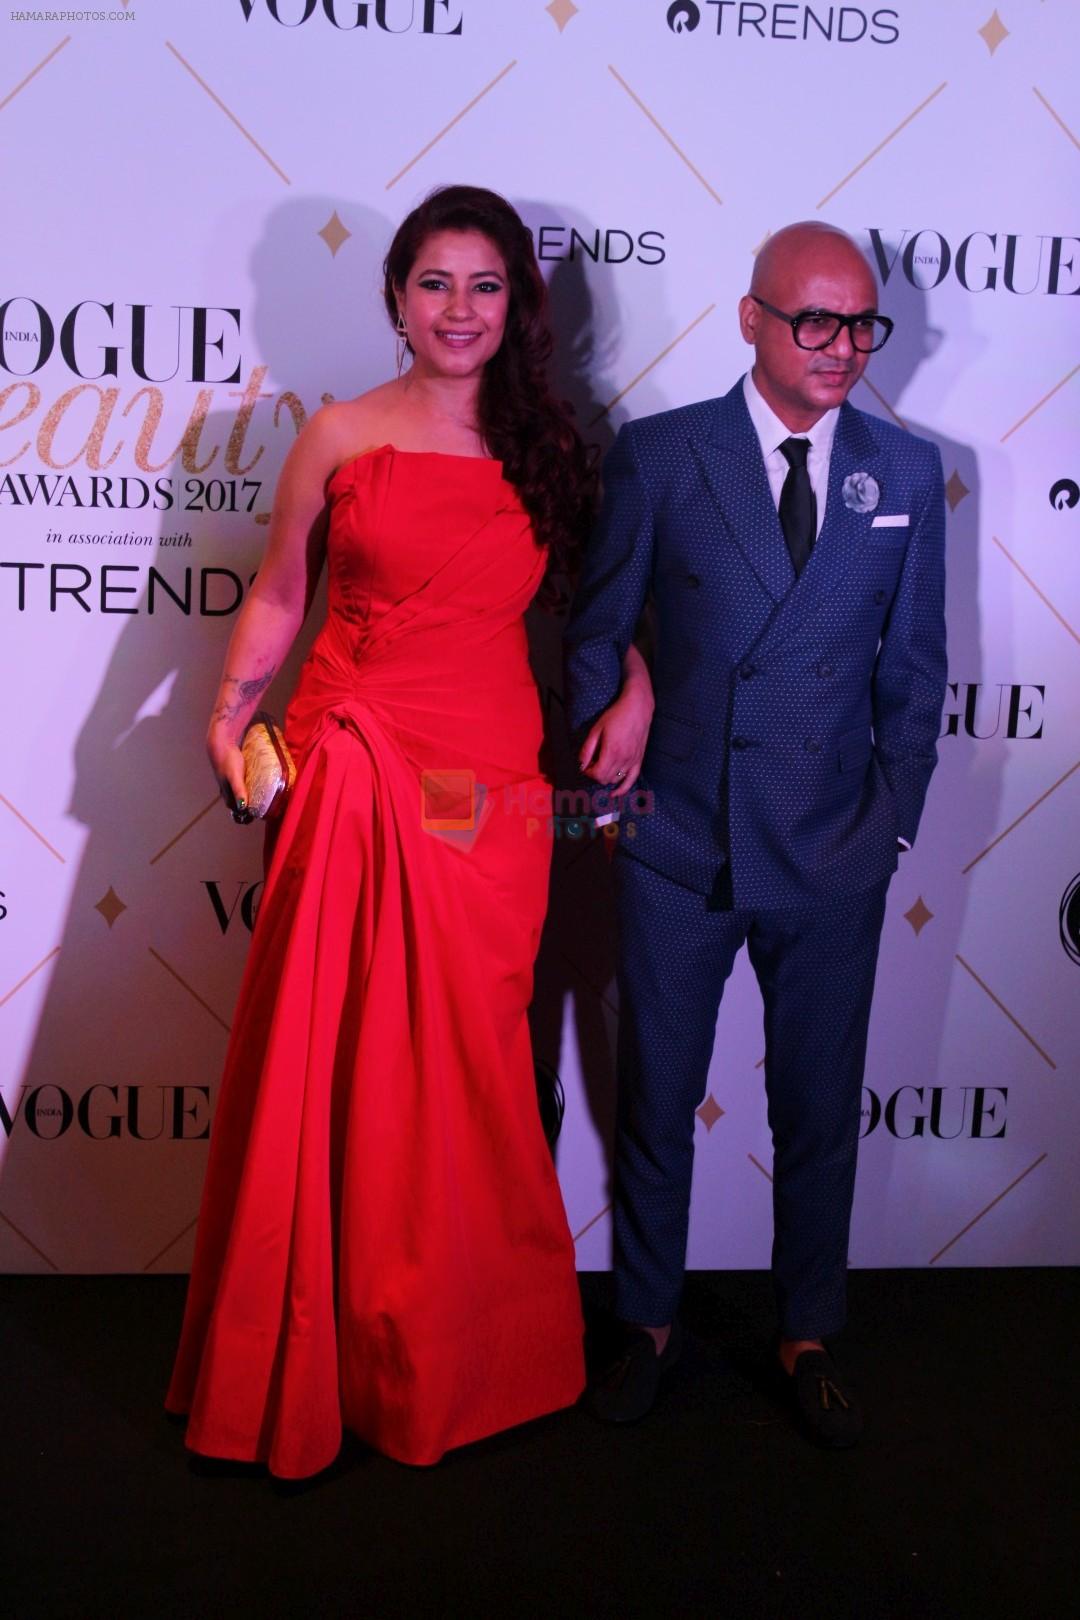 Hakim Aalim at The Red Carpet Of Vogue Beauty Awards 2017 on 2nd Aug 2017